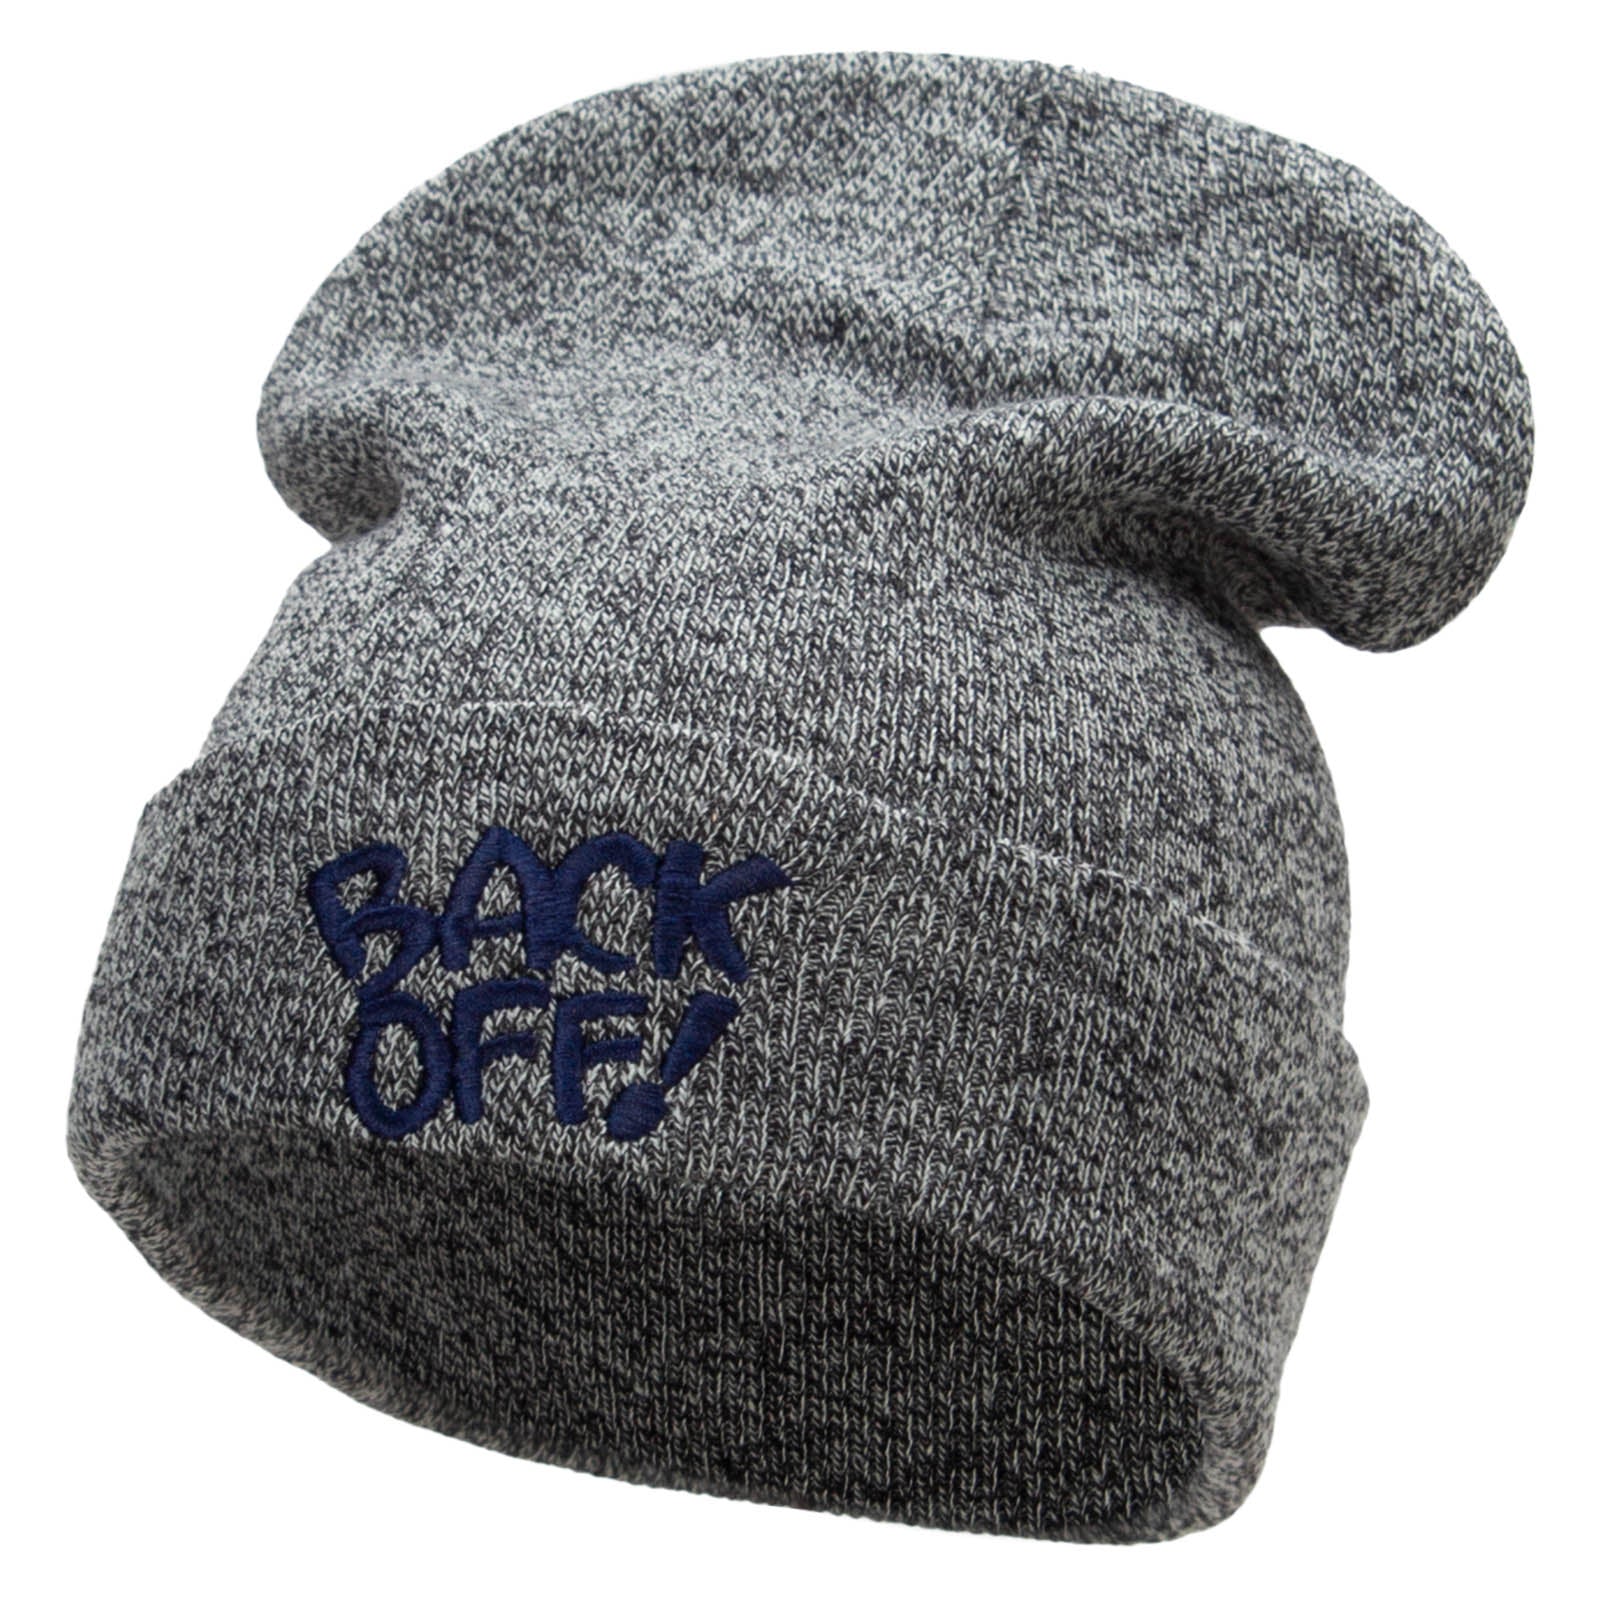 Back Off Phrase Embroidered 12 Inch Long Knitted Beanie - Black Marled OSFM